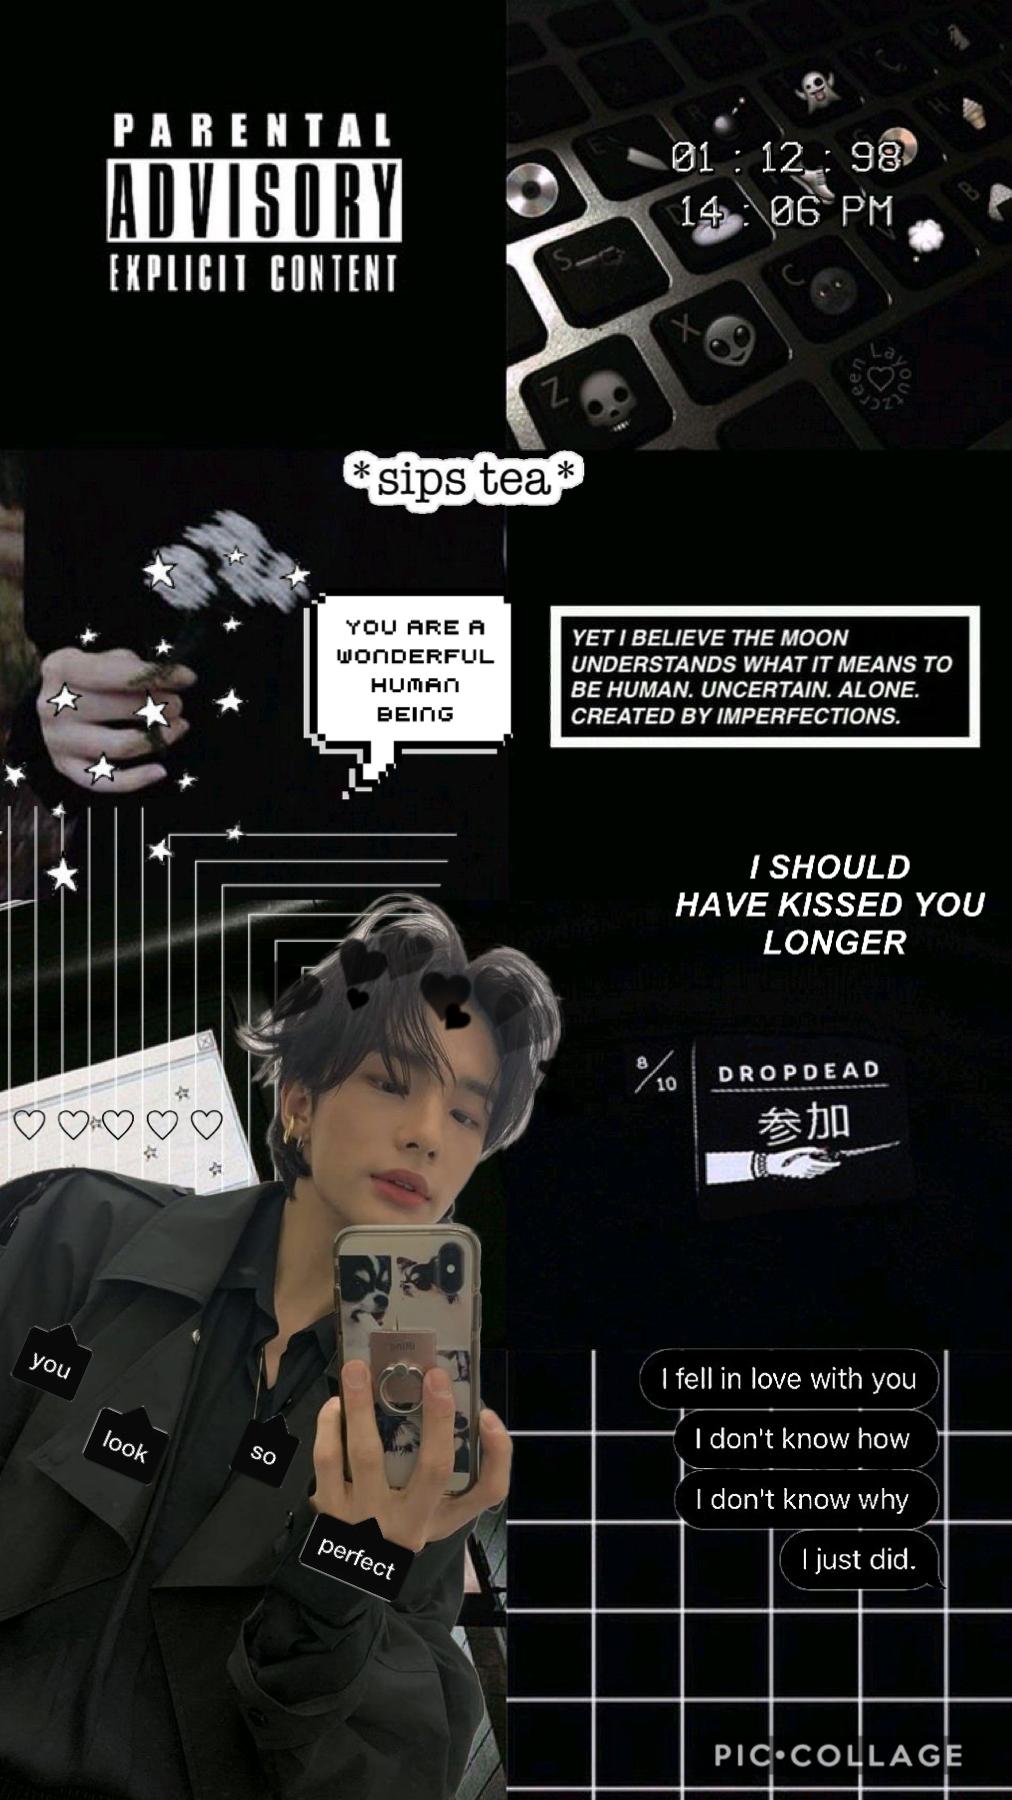 ☆*:.｡.tap.｡.:*☆
hwang hyunjin <3
im pretty proud of this and i think it turned out pretty well :)